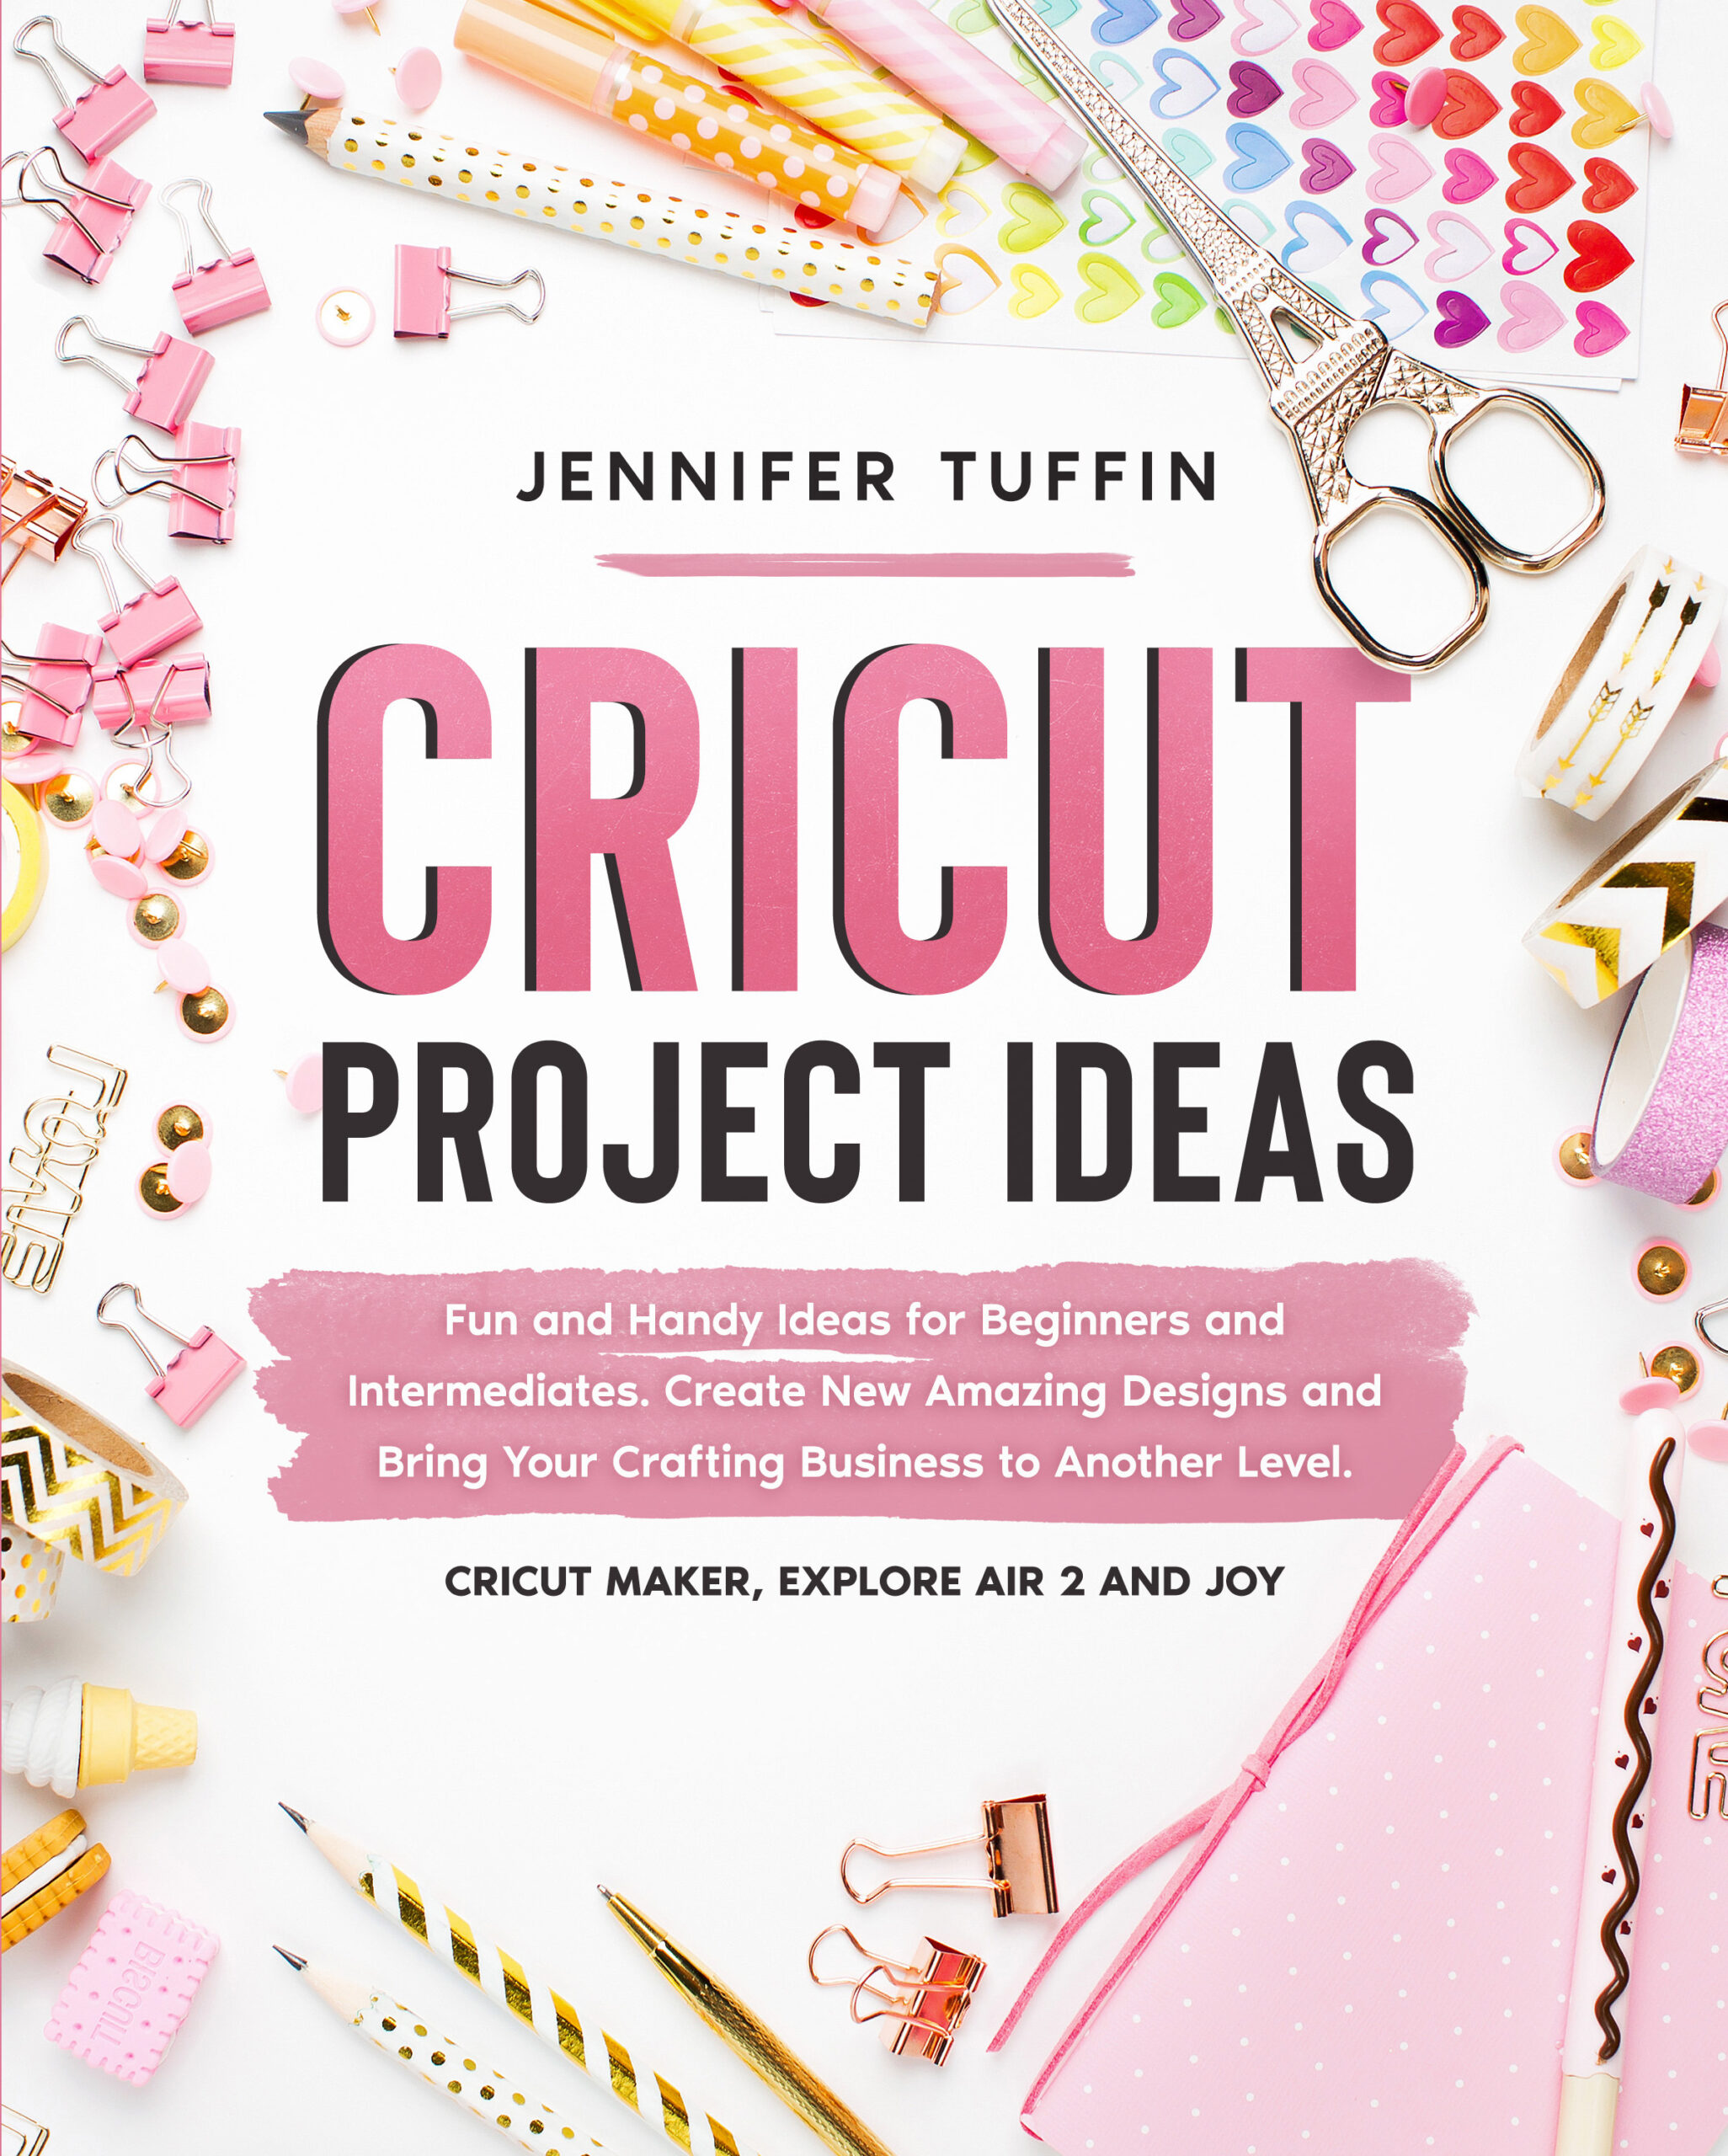 FREE: Cricut Project Ideas: Fun and Handy Ideas for Beginners and Intermediates. Create New Amazing Designs and Bring Your Crafting Business to Another Level. Cricut Maker, Explore Air 2, and Joy. by Jennifer Tuffin